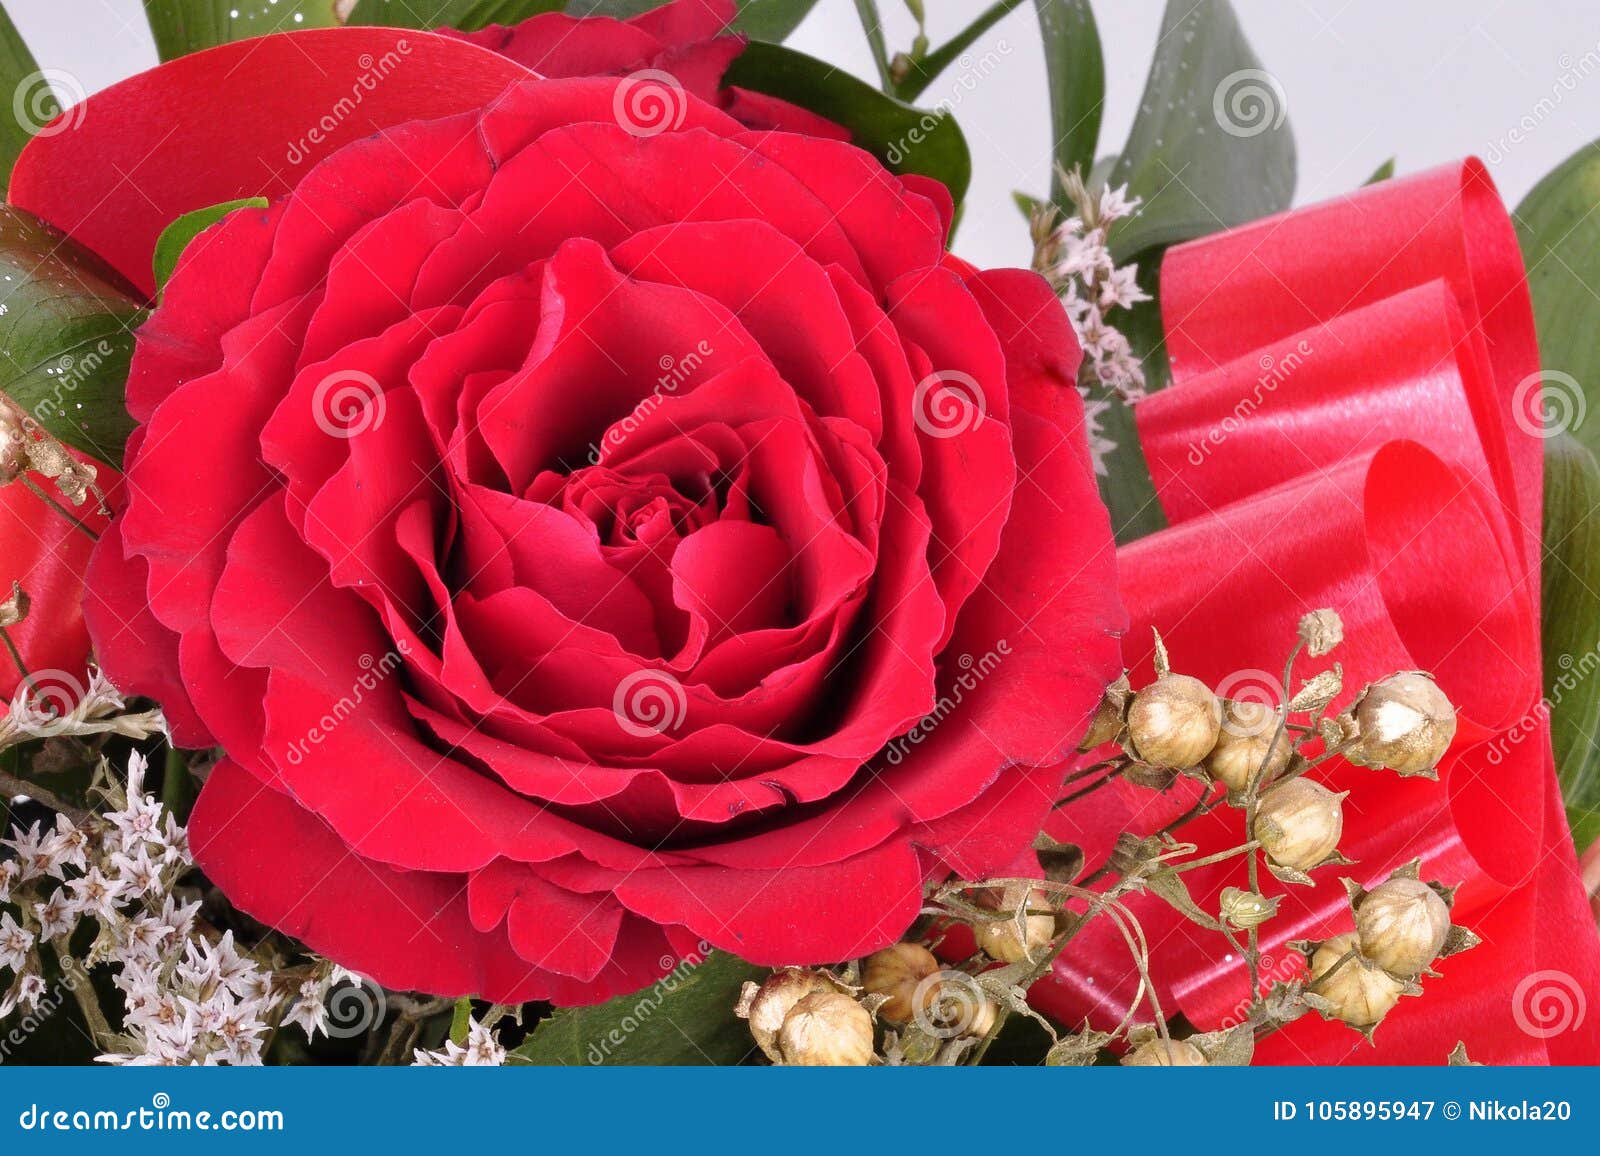 big beautifulof red roses flower. texture ped colors. valentine